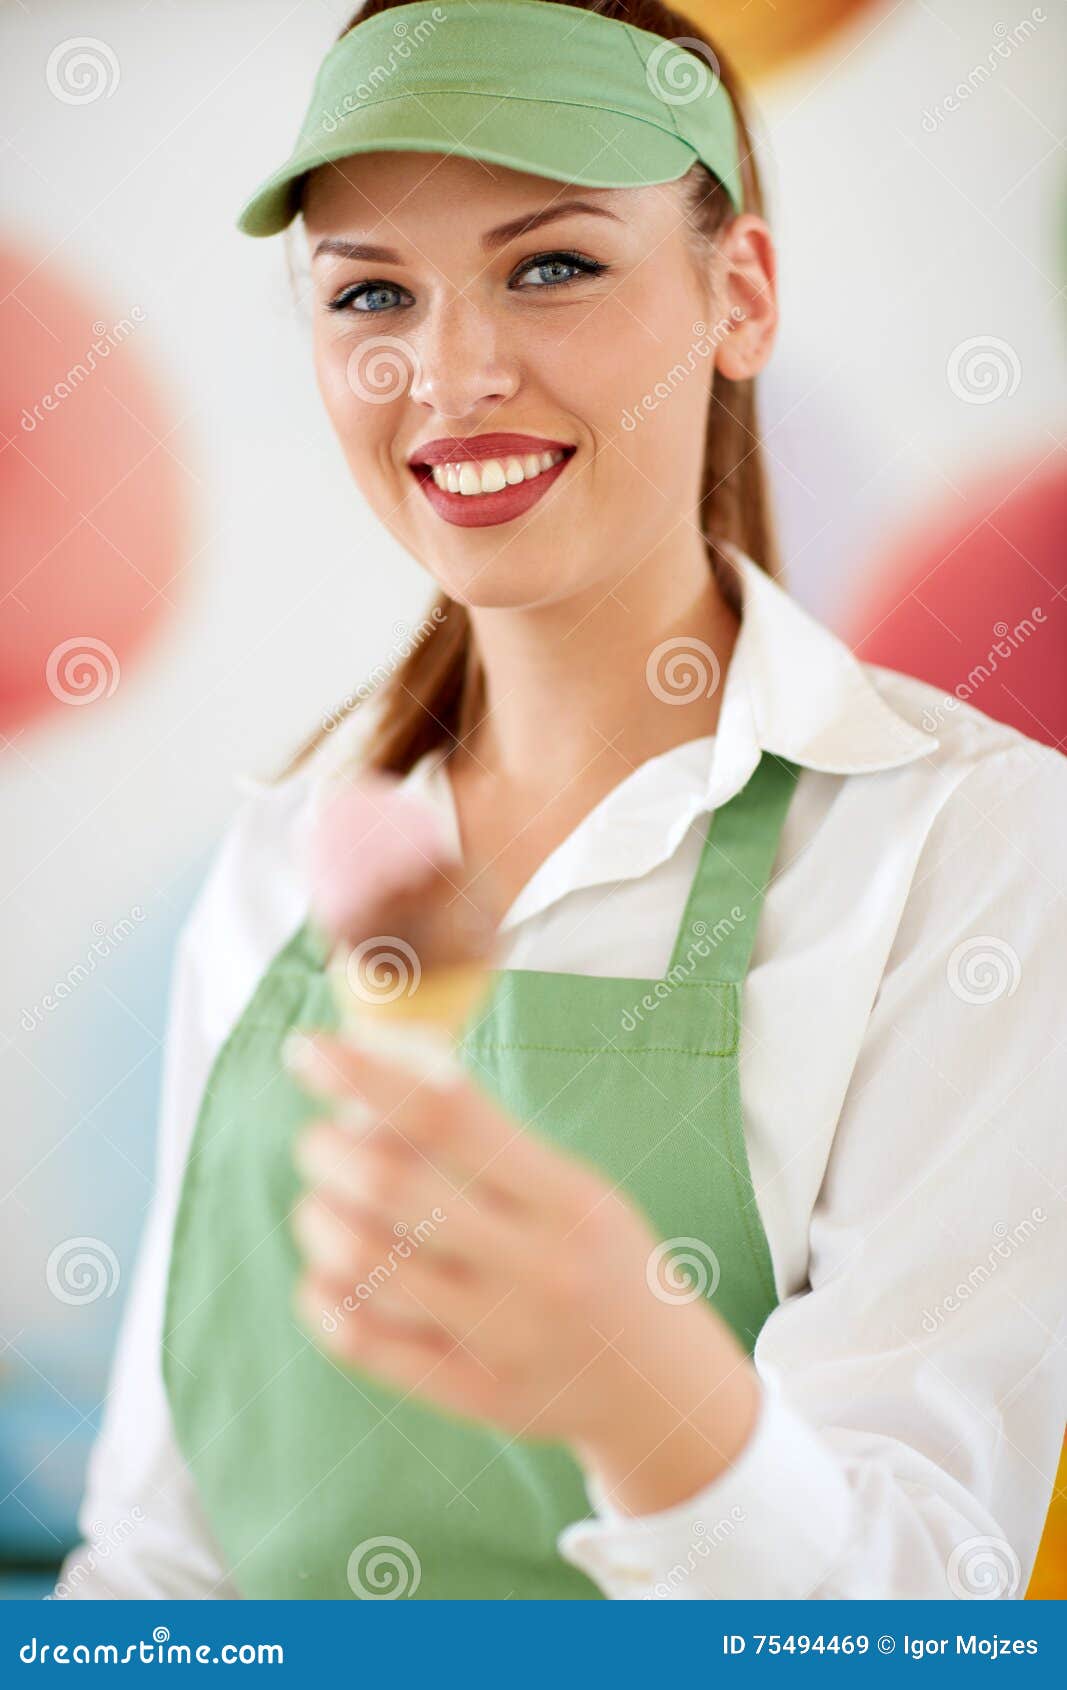 attractive woman employed in candy store